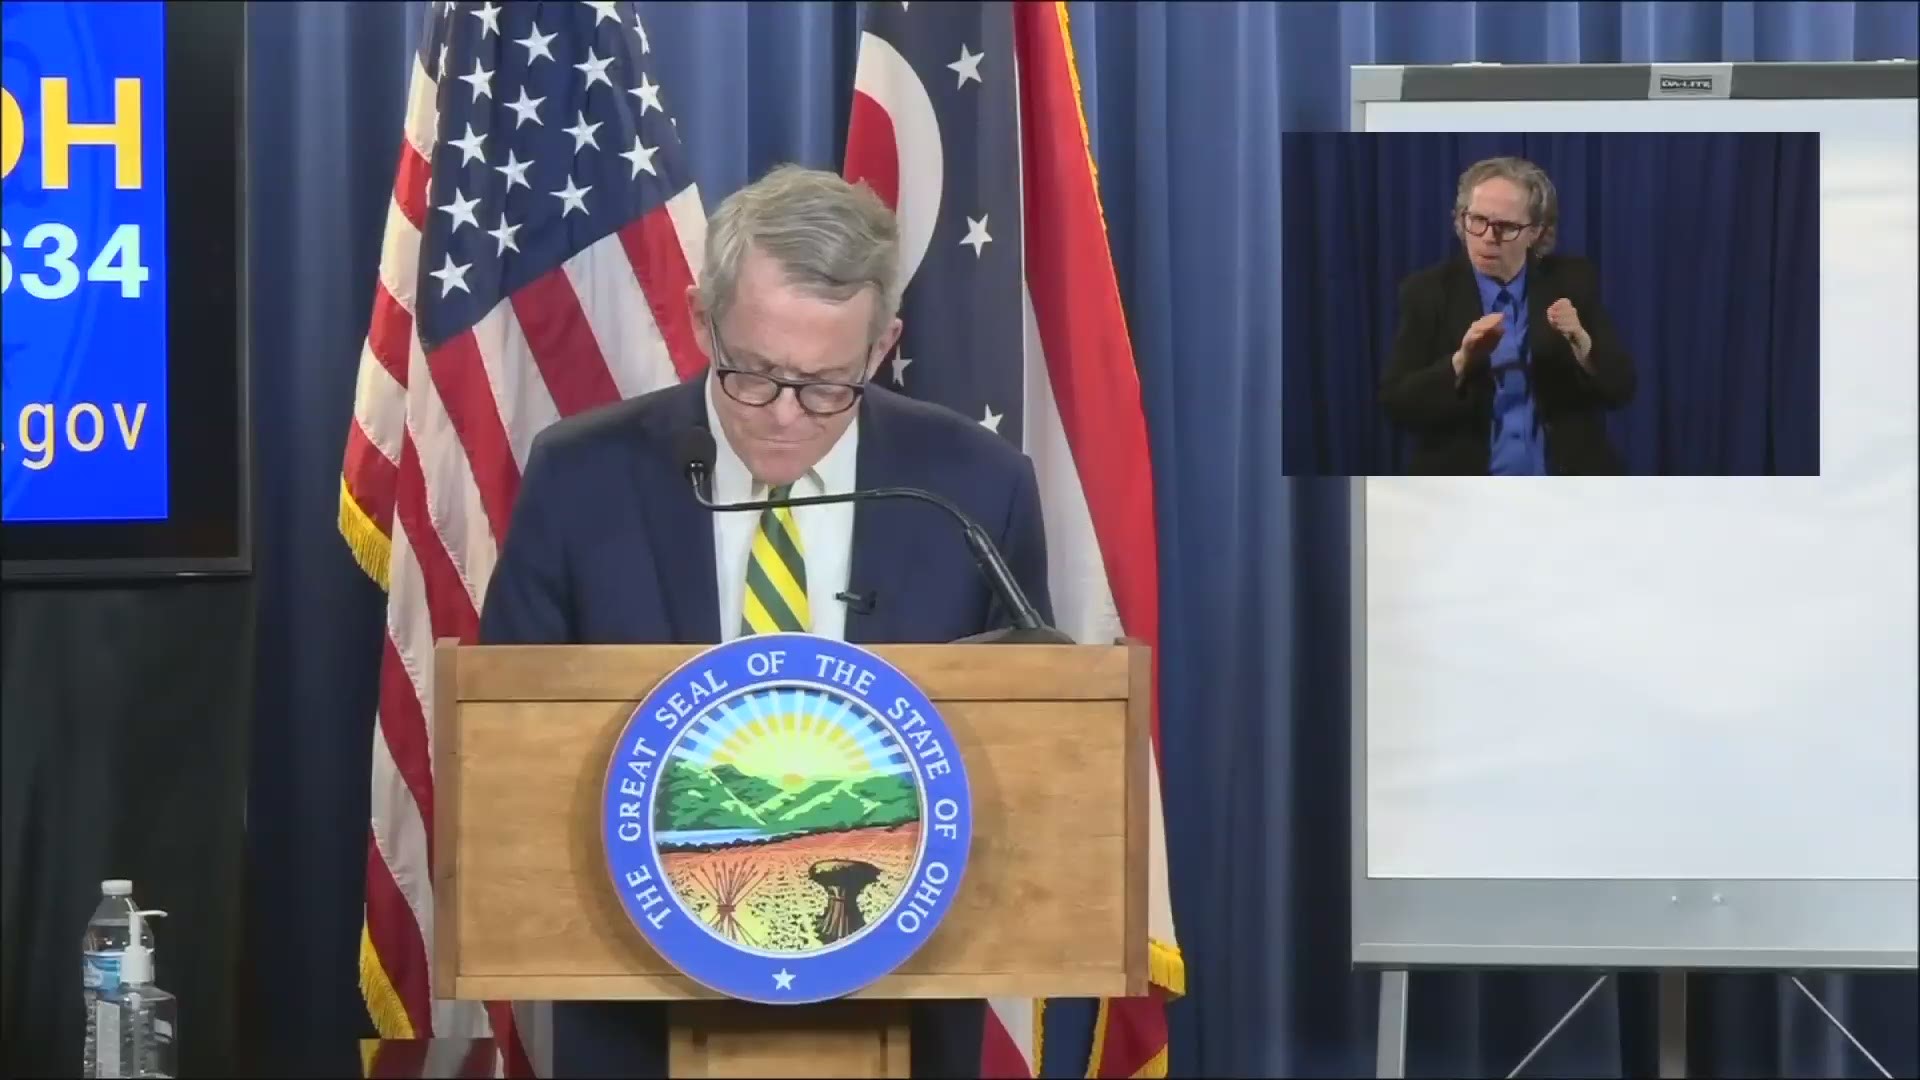 Ohio Governor Mike DeWine announced on Friday that the state has reached an agreement with Thermo Fisher to expand coronavirus testing.